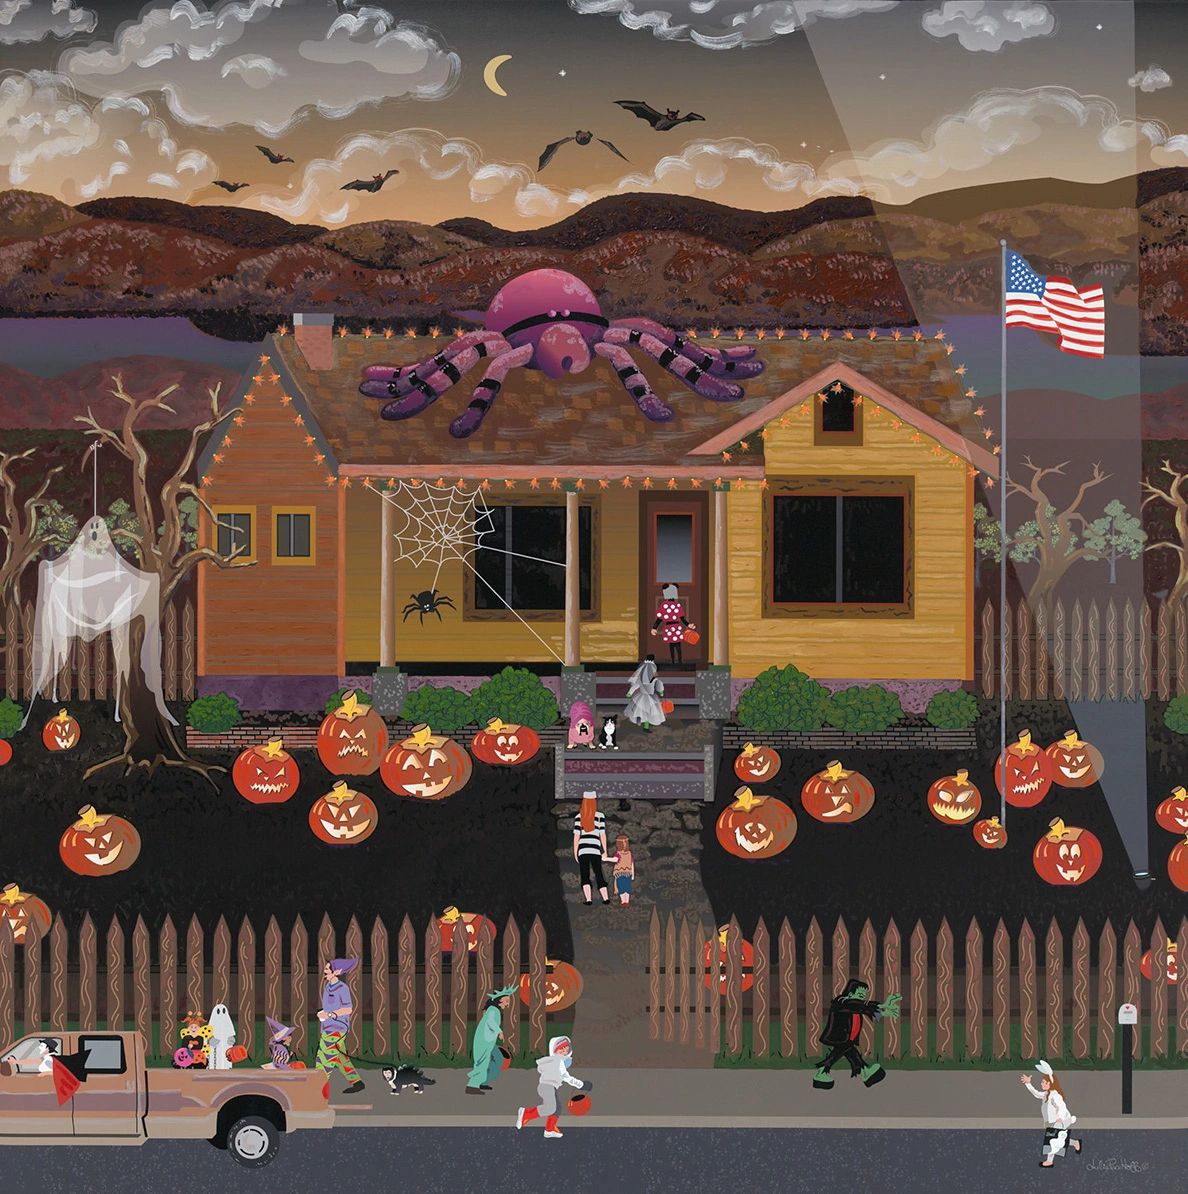 Modern-day Halloween celebration of trick-or-treaters jack o lanterns bats flying ghosts and a huge 